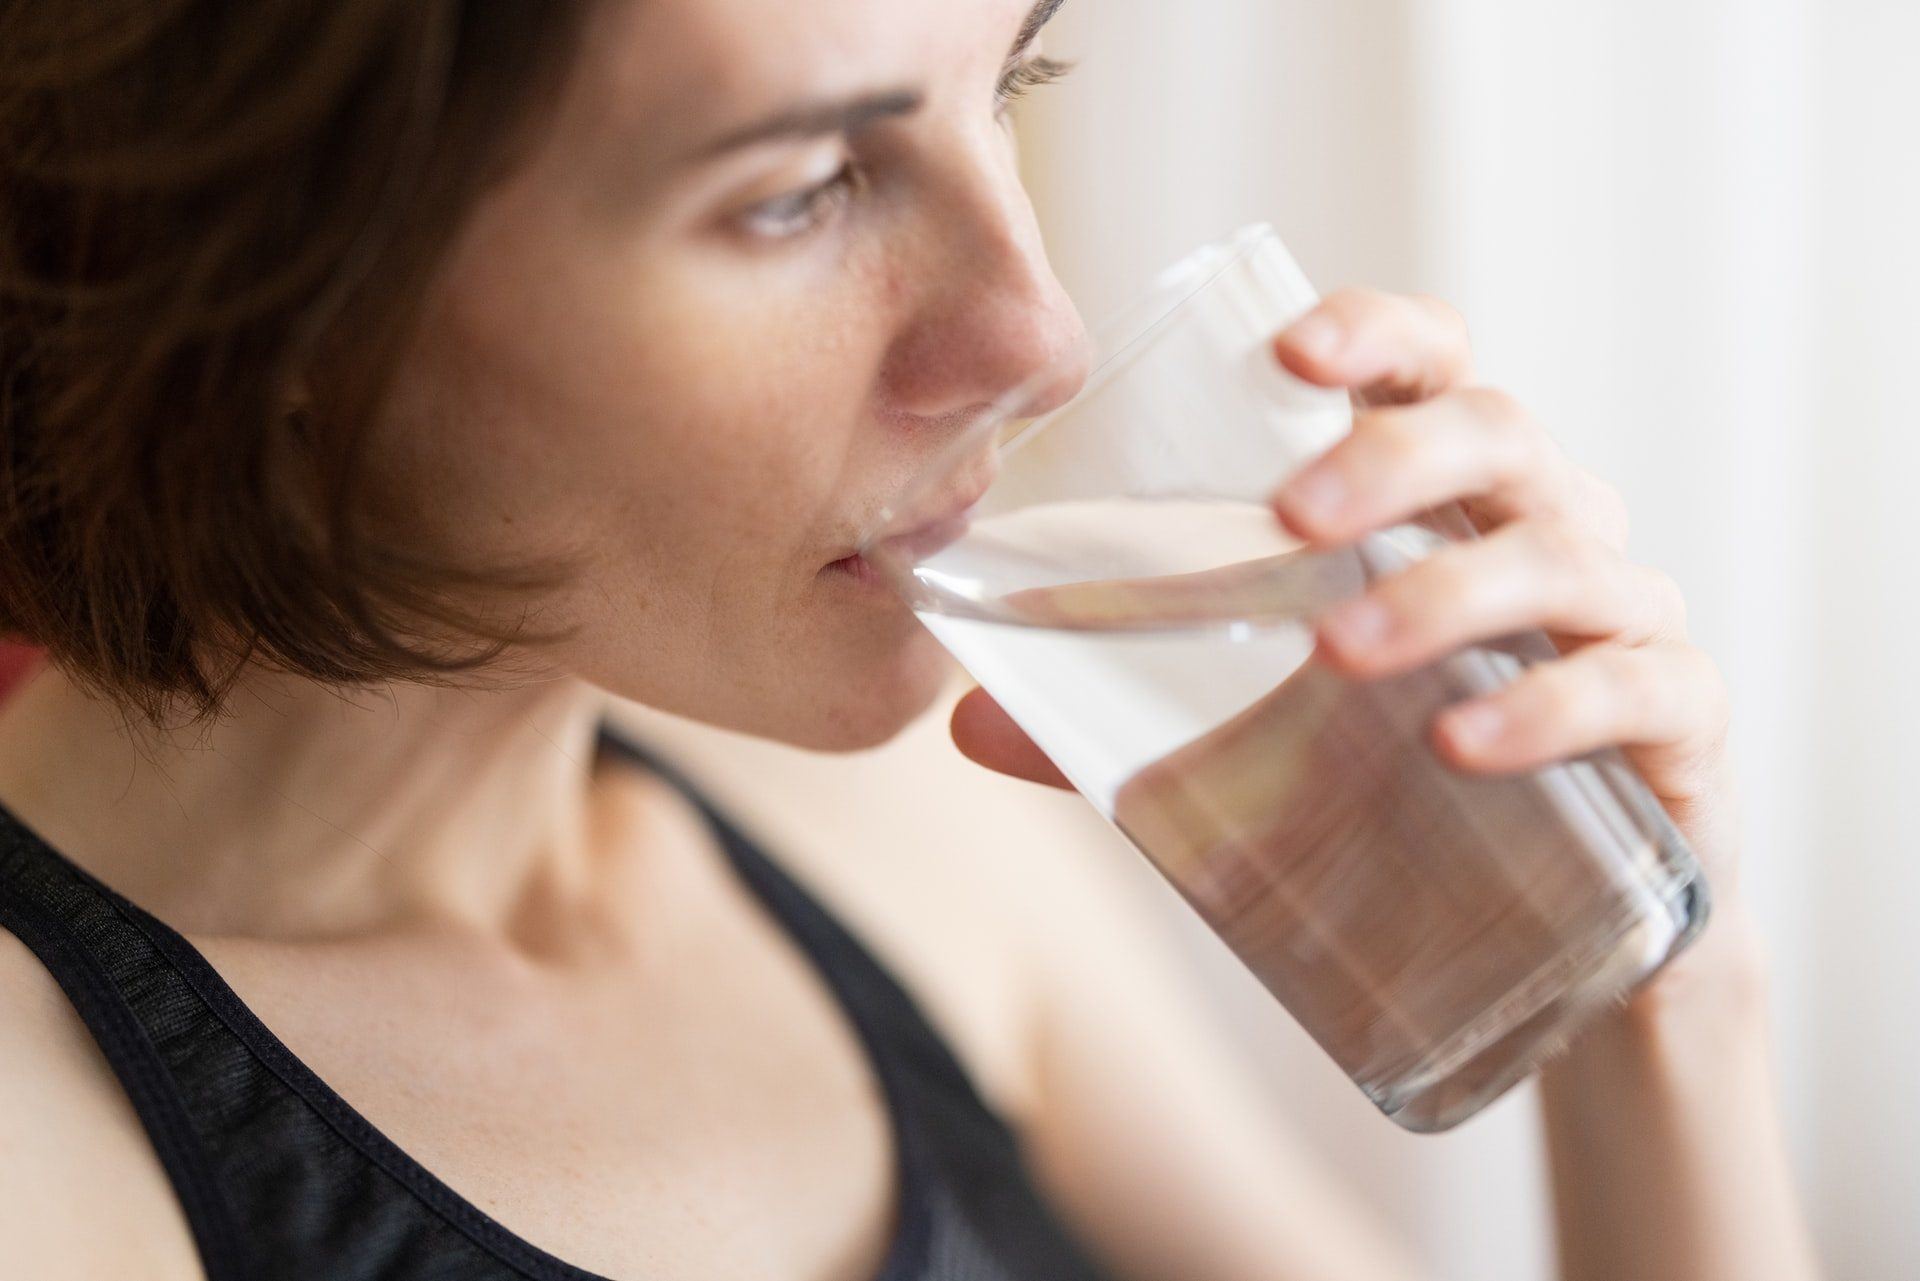 Water Contamination Is Damaging, Here’s What You Need To Know